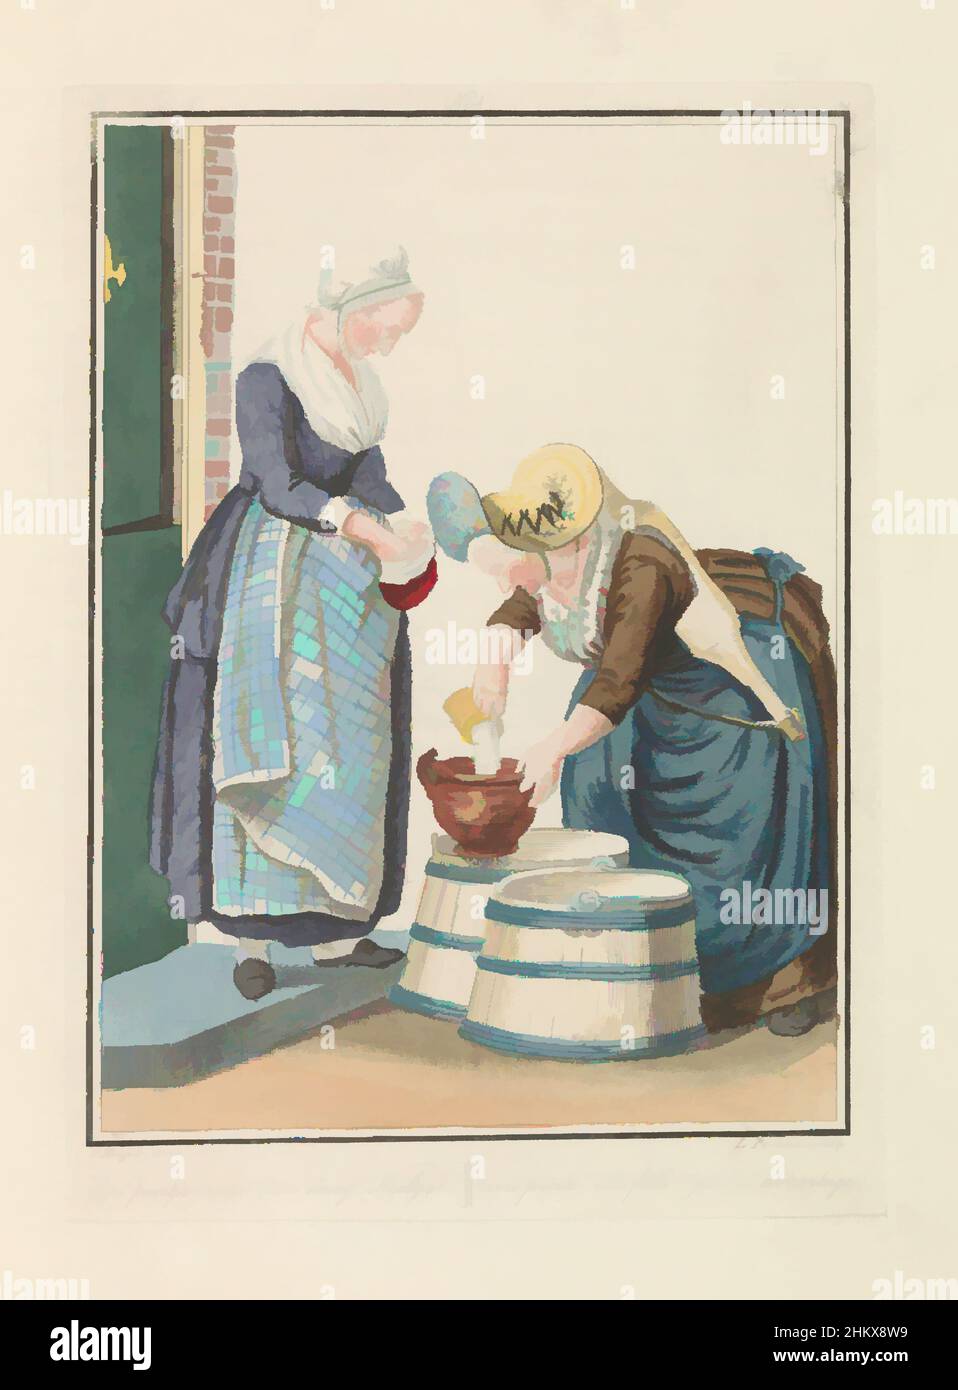 Art inspired by Handmaid and milk-seller, Een pintje maar van daag, Neeltje!, Une pinte, ma fille! pas d'avantage, A maid buys milk from a milk seller at the door. She pours a pint of milk into a bowl. Part of a bound edition of the series of twenty-four plates of Dutch costumes in the, Classic works modernized by Artotop with a splash of modernity. Shapes, color and value, eye-catching visual impact on art. Emotions through freedom of artworks in a contemporary way. A timeless message pursuing a wildly creative new direction. Artists turning to the digital medium and creating the Artotop NFT Stock Photo